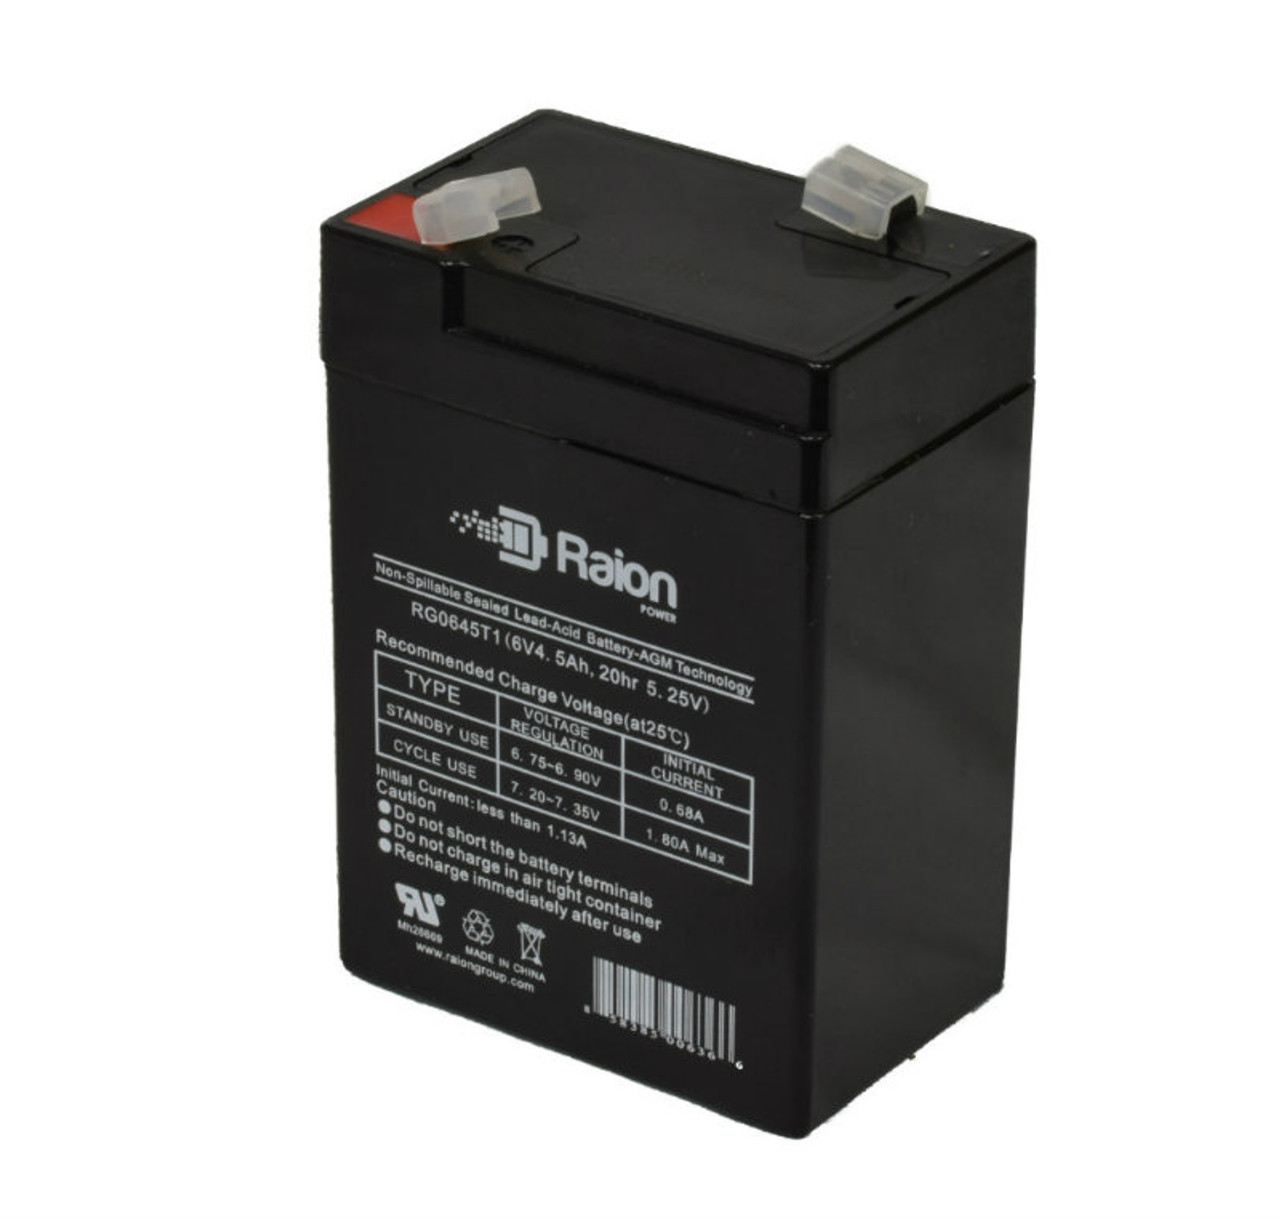 Raion Power RG0645T1 6V 4.5Ah Replacement Battery Cartridge for Lithonia AP